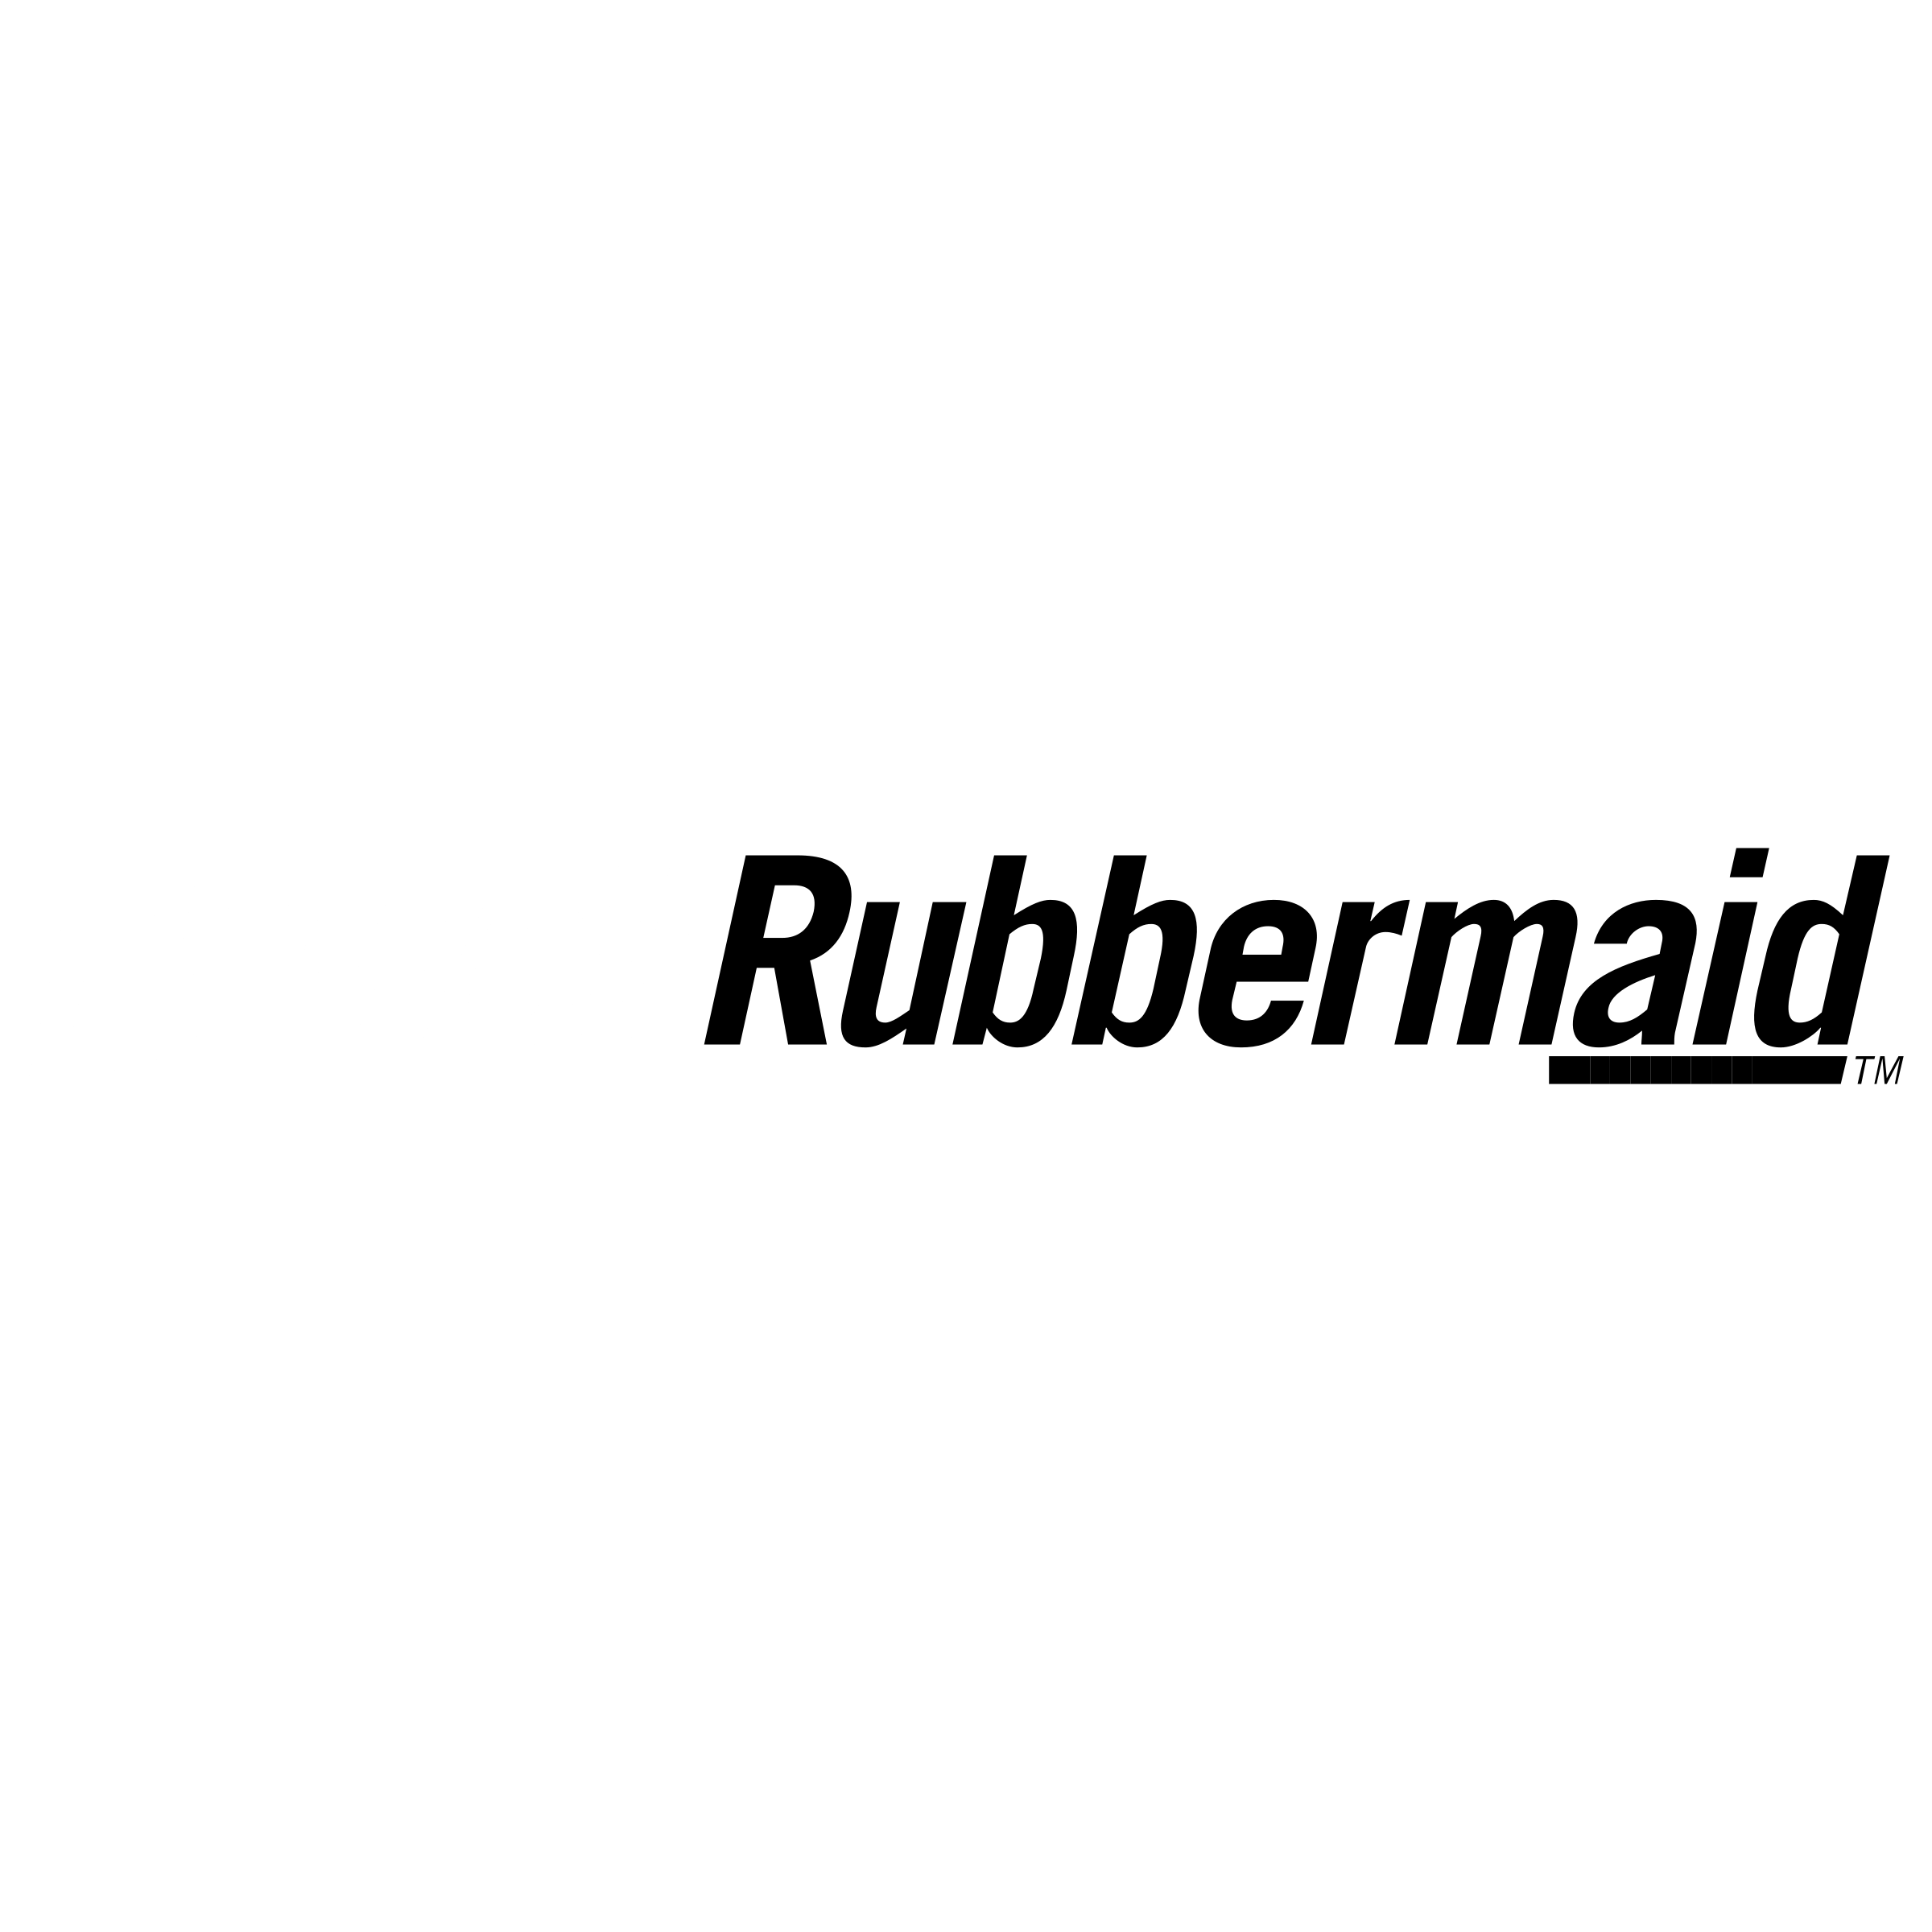 Newell Logo - Newell Rubbermaid Logo PNG Transparent & SVG Vector